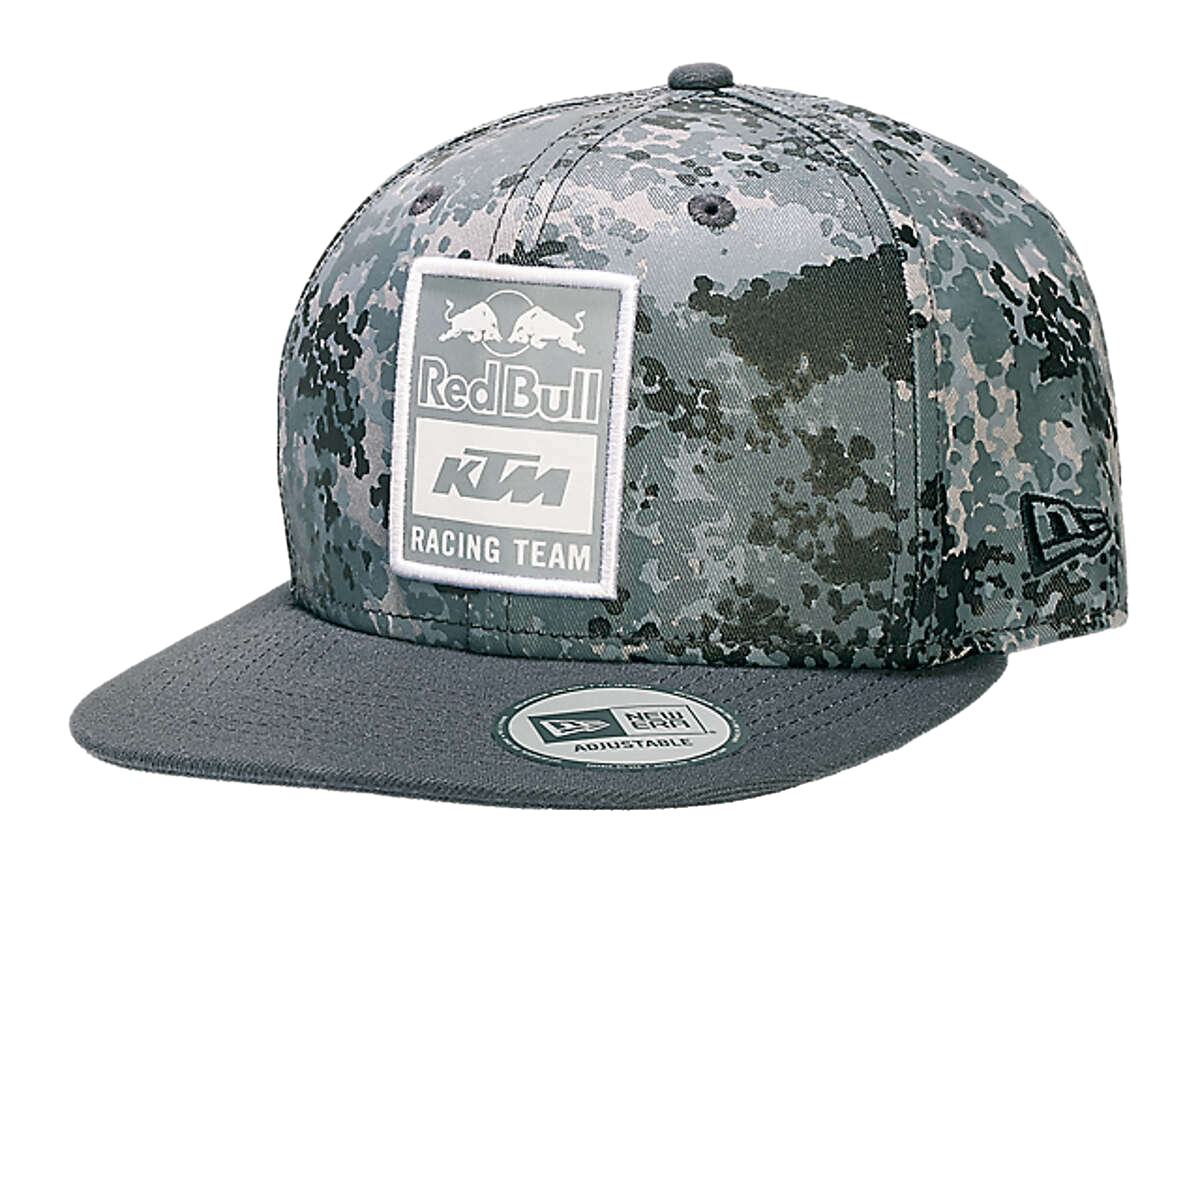 Red Bull Casquette Snap Back KTM Racing Team Camo - Grey Camouflage